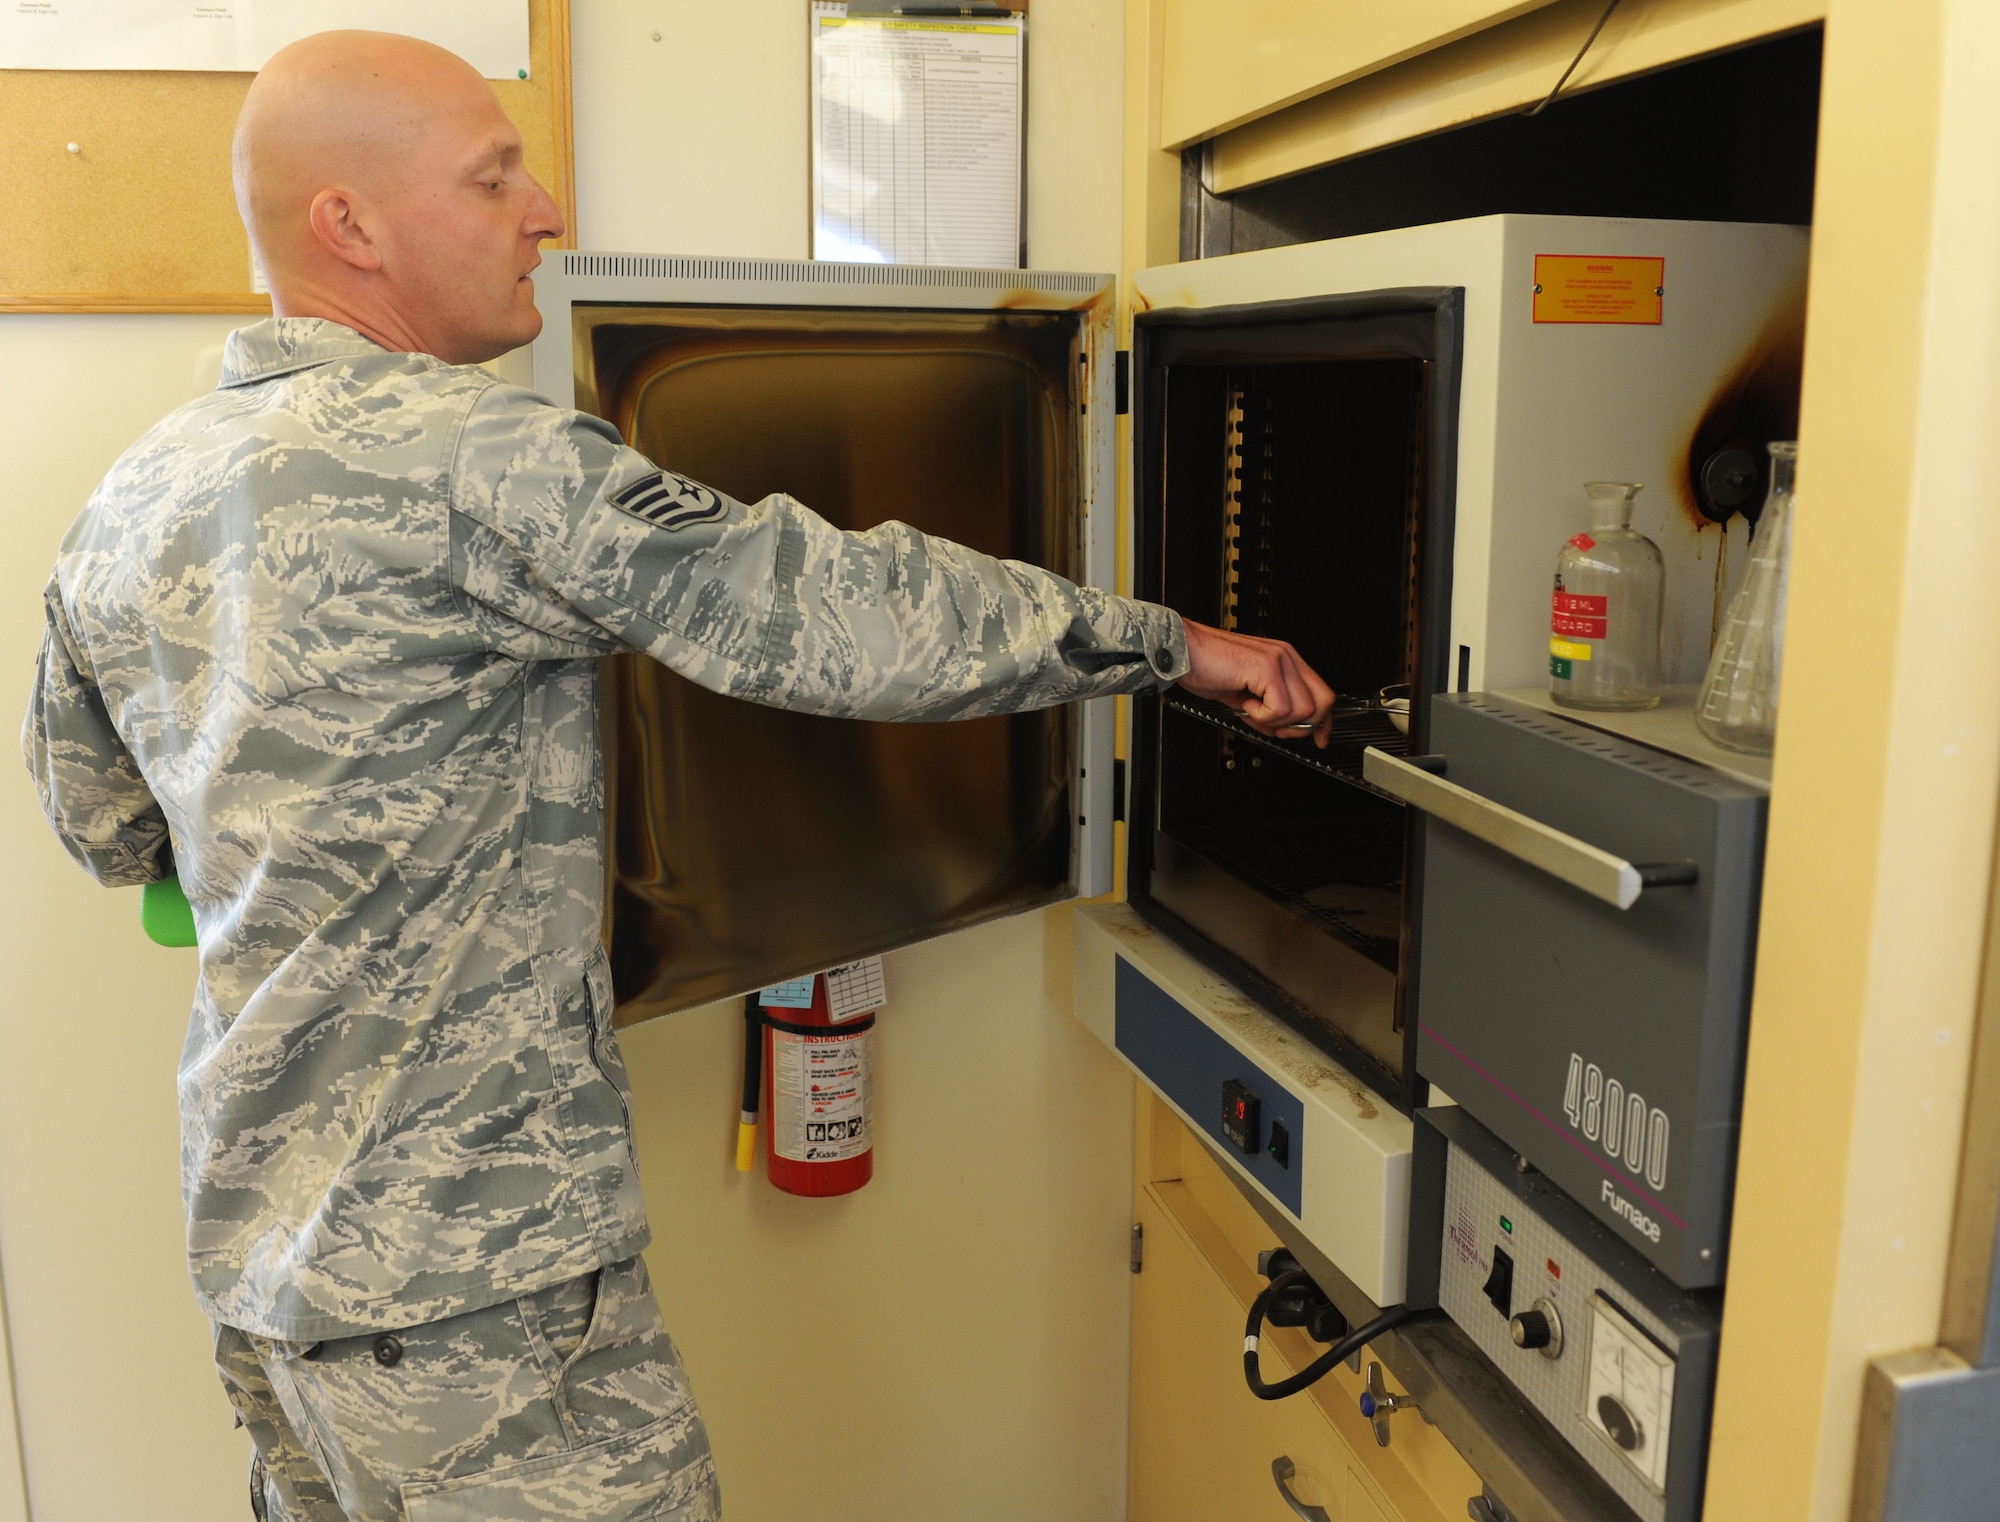 Staff Sgt. Paul Bauer, 9th Civil Engineer Squadron water and fuels system maintenance journeyman, prepares to bake a sample of bio-solid in an oven set to 265 degrees Celsius at the waste water facility on Beale Air Force Base, Calif., March 5, 2013. Through this scientific process the facility is able to determine how much bacteria is being removed from the bio-solid. (U.S. Air Force photo by Airman 1st Class Bobby Cummings/Released)